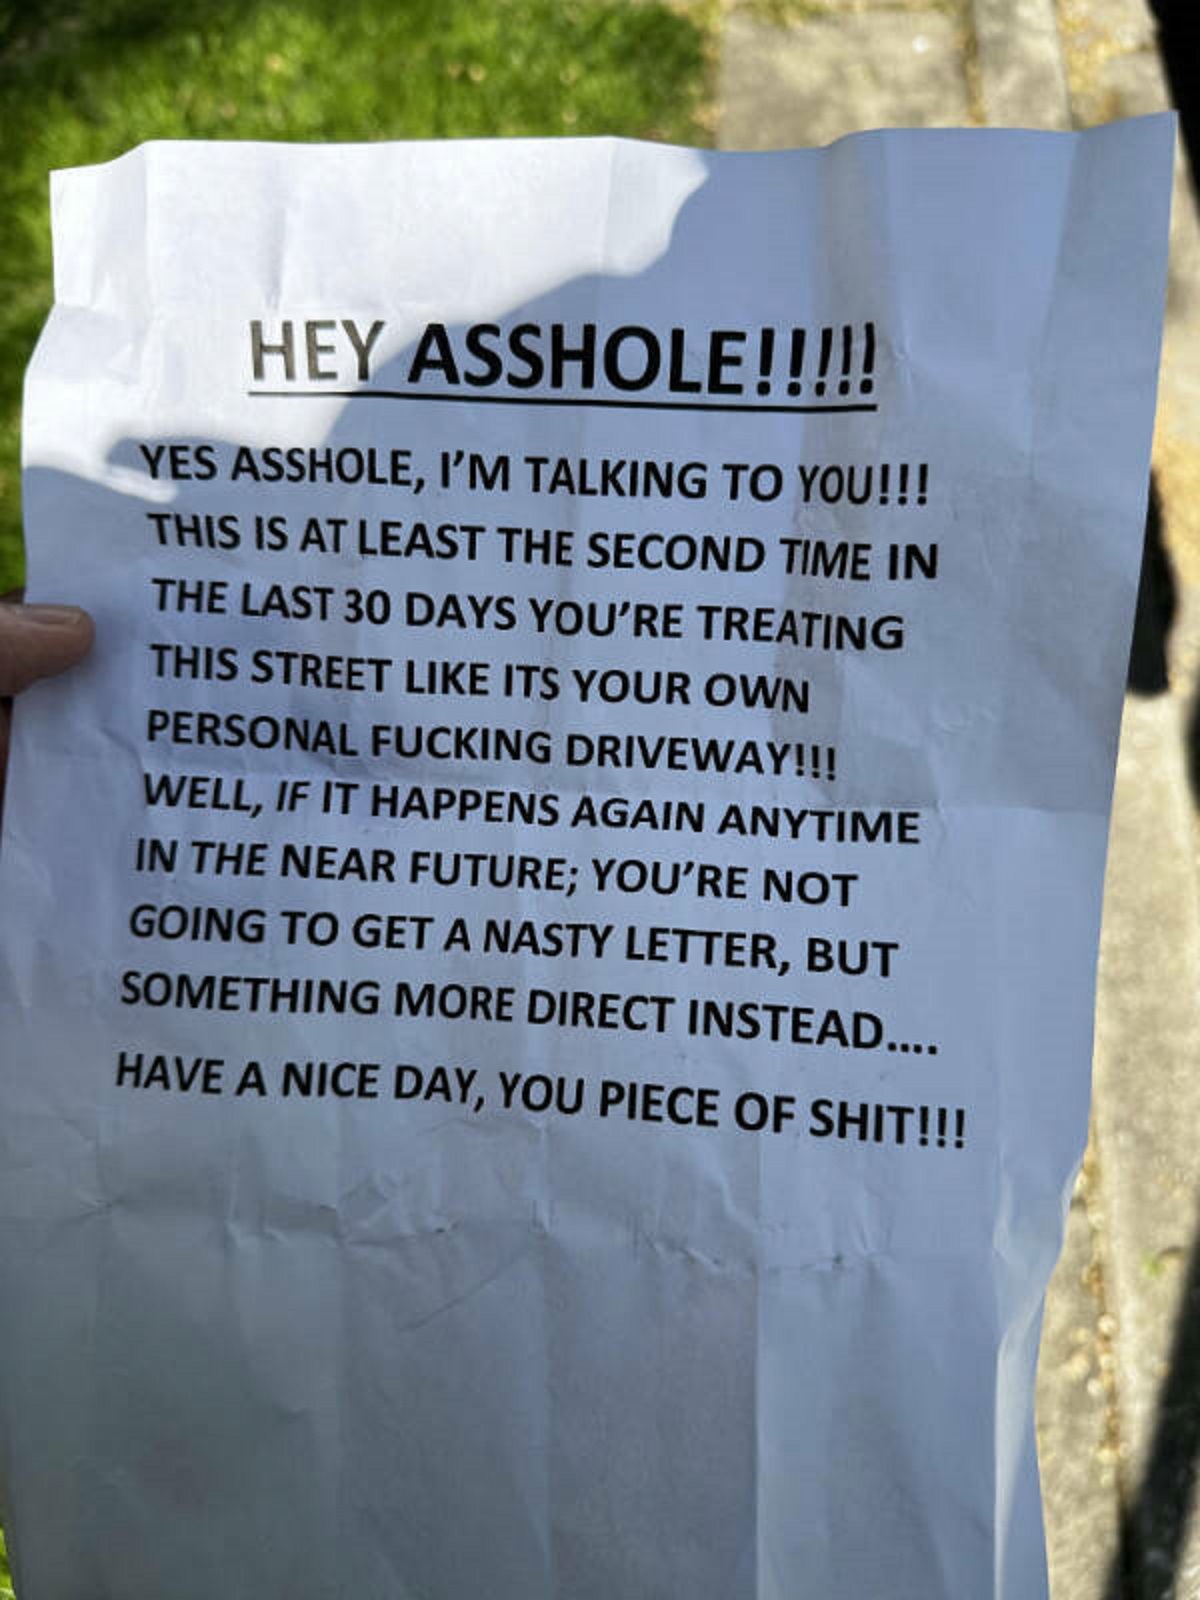 “Letter was placed on my car, on a public street in Chicago…”